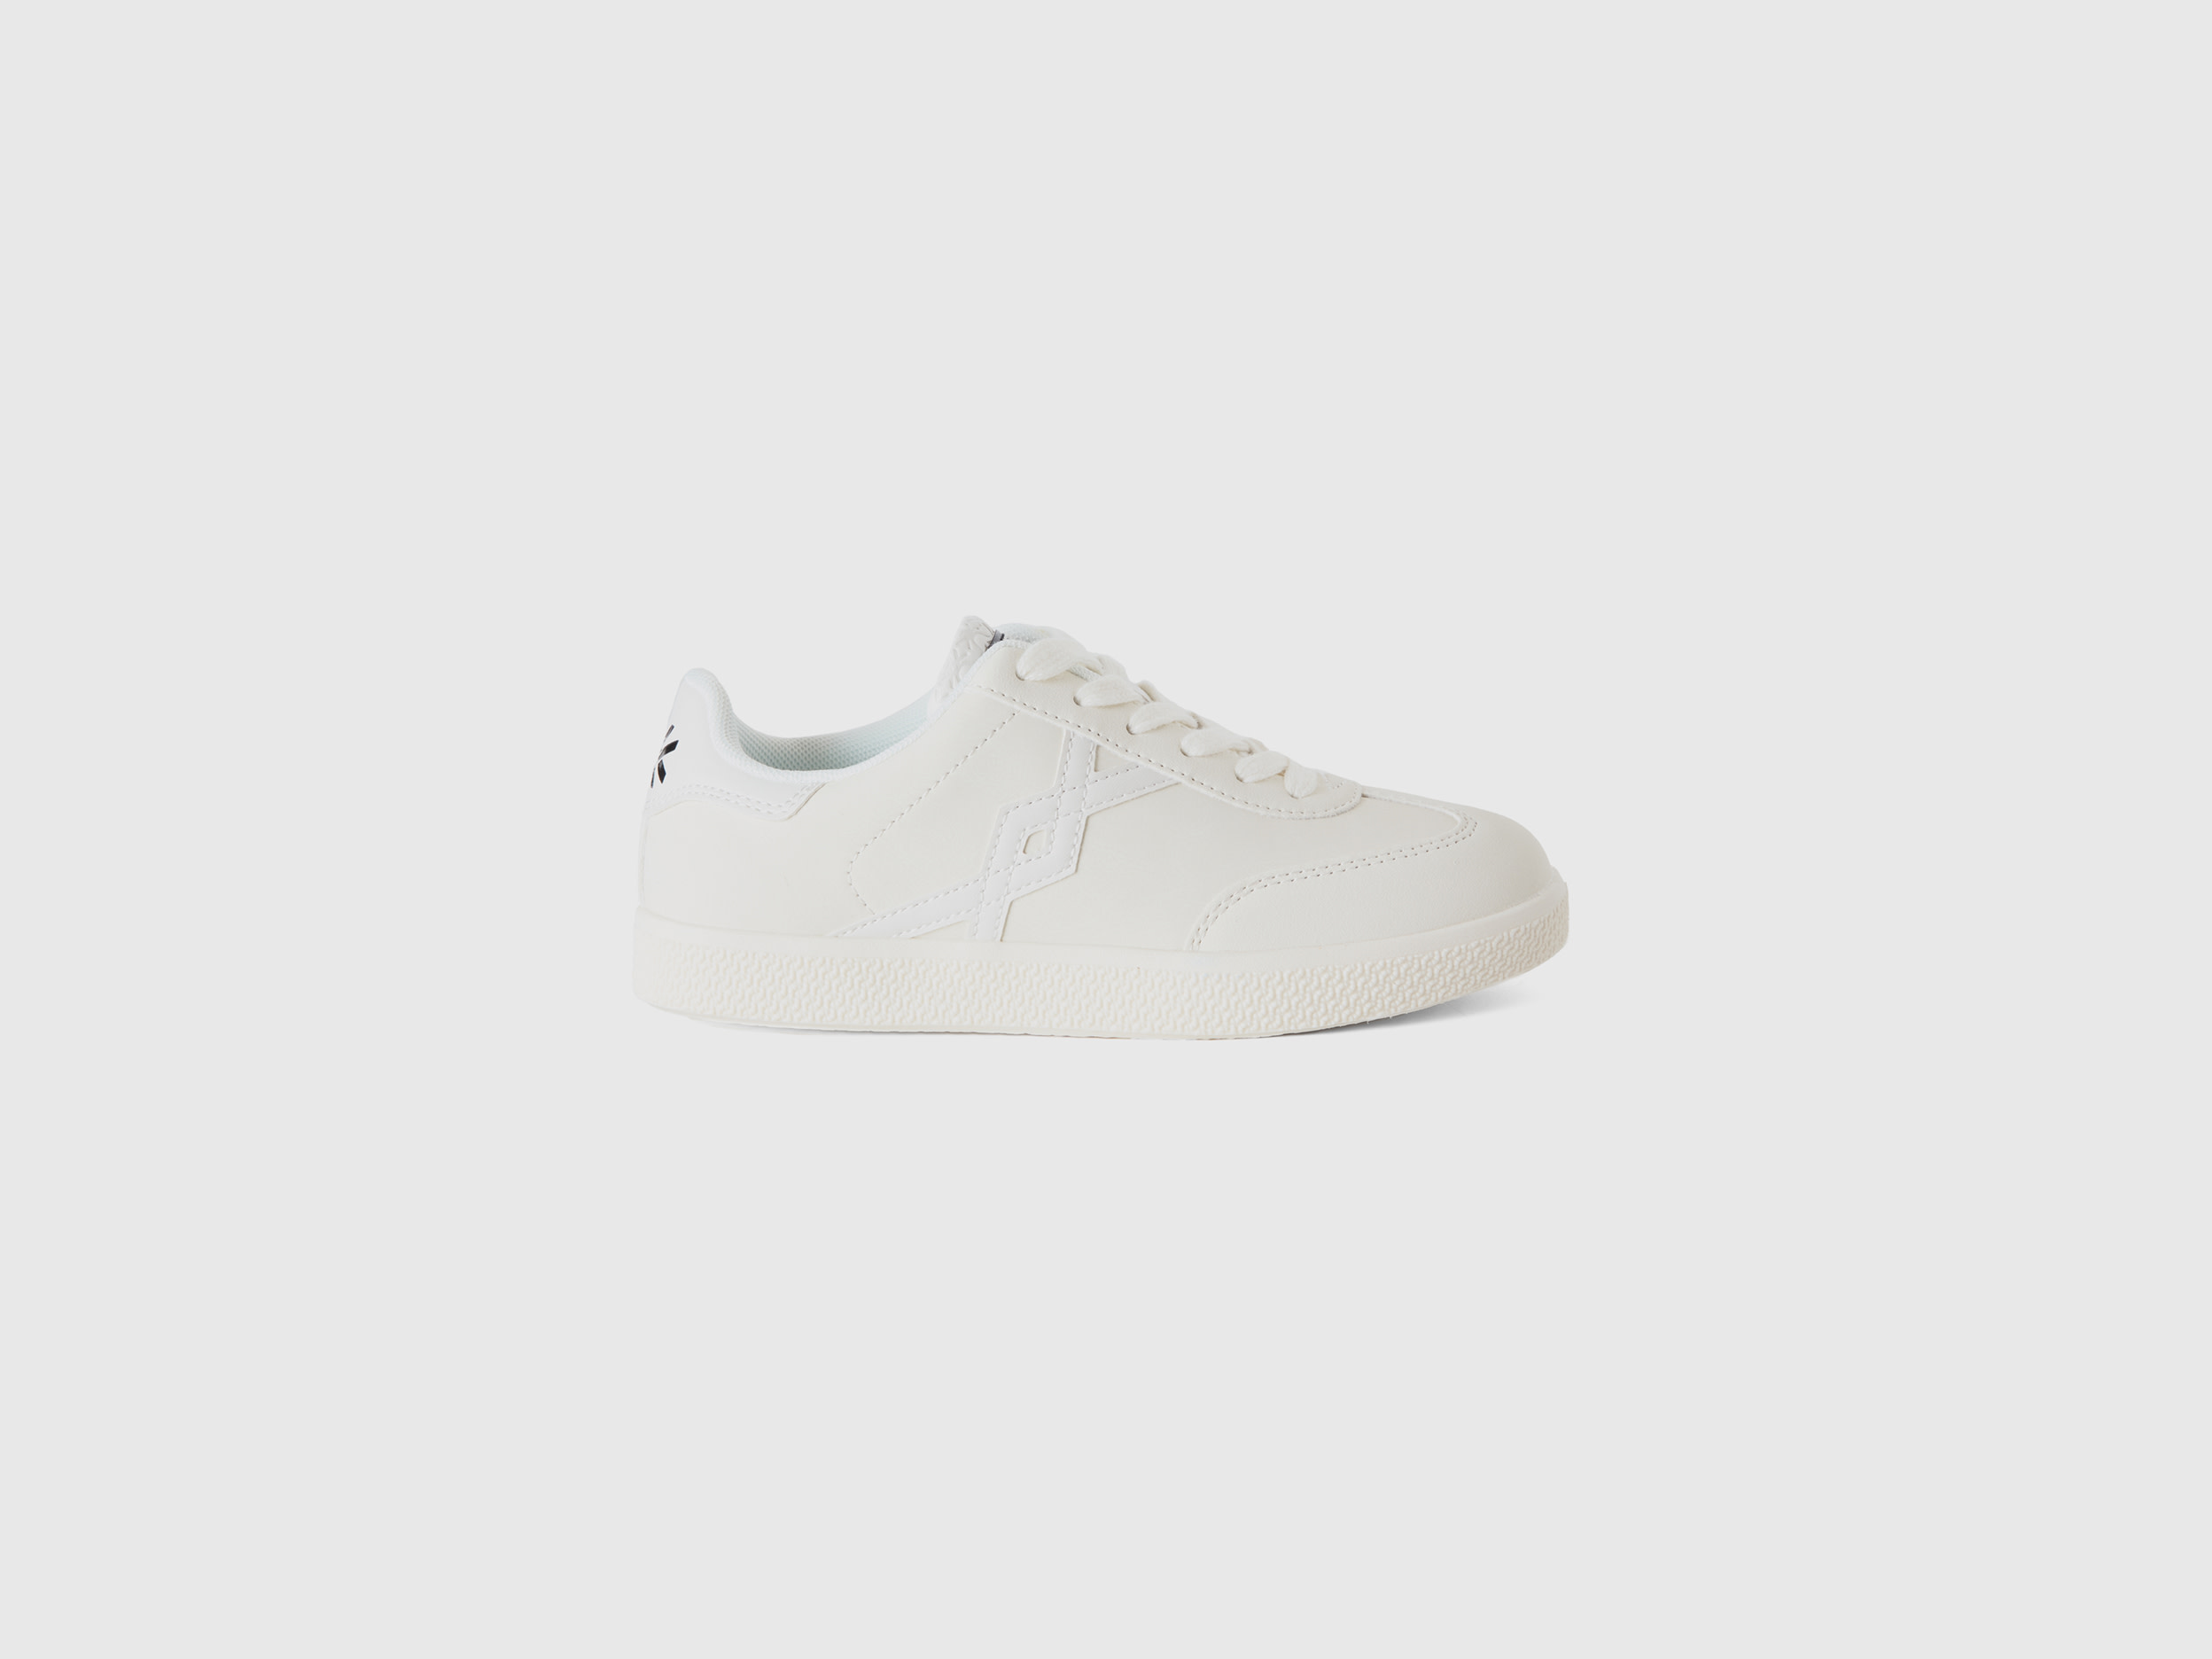 Benetton, Sneakers In Imitation Leather, size 2Y, Creamy White, Kids